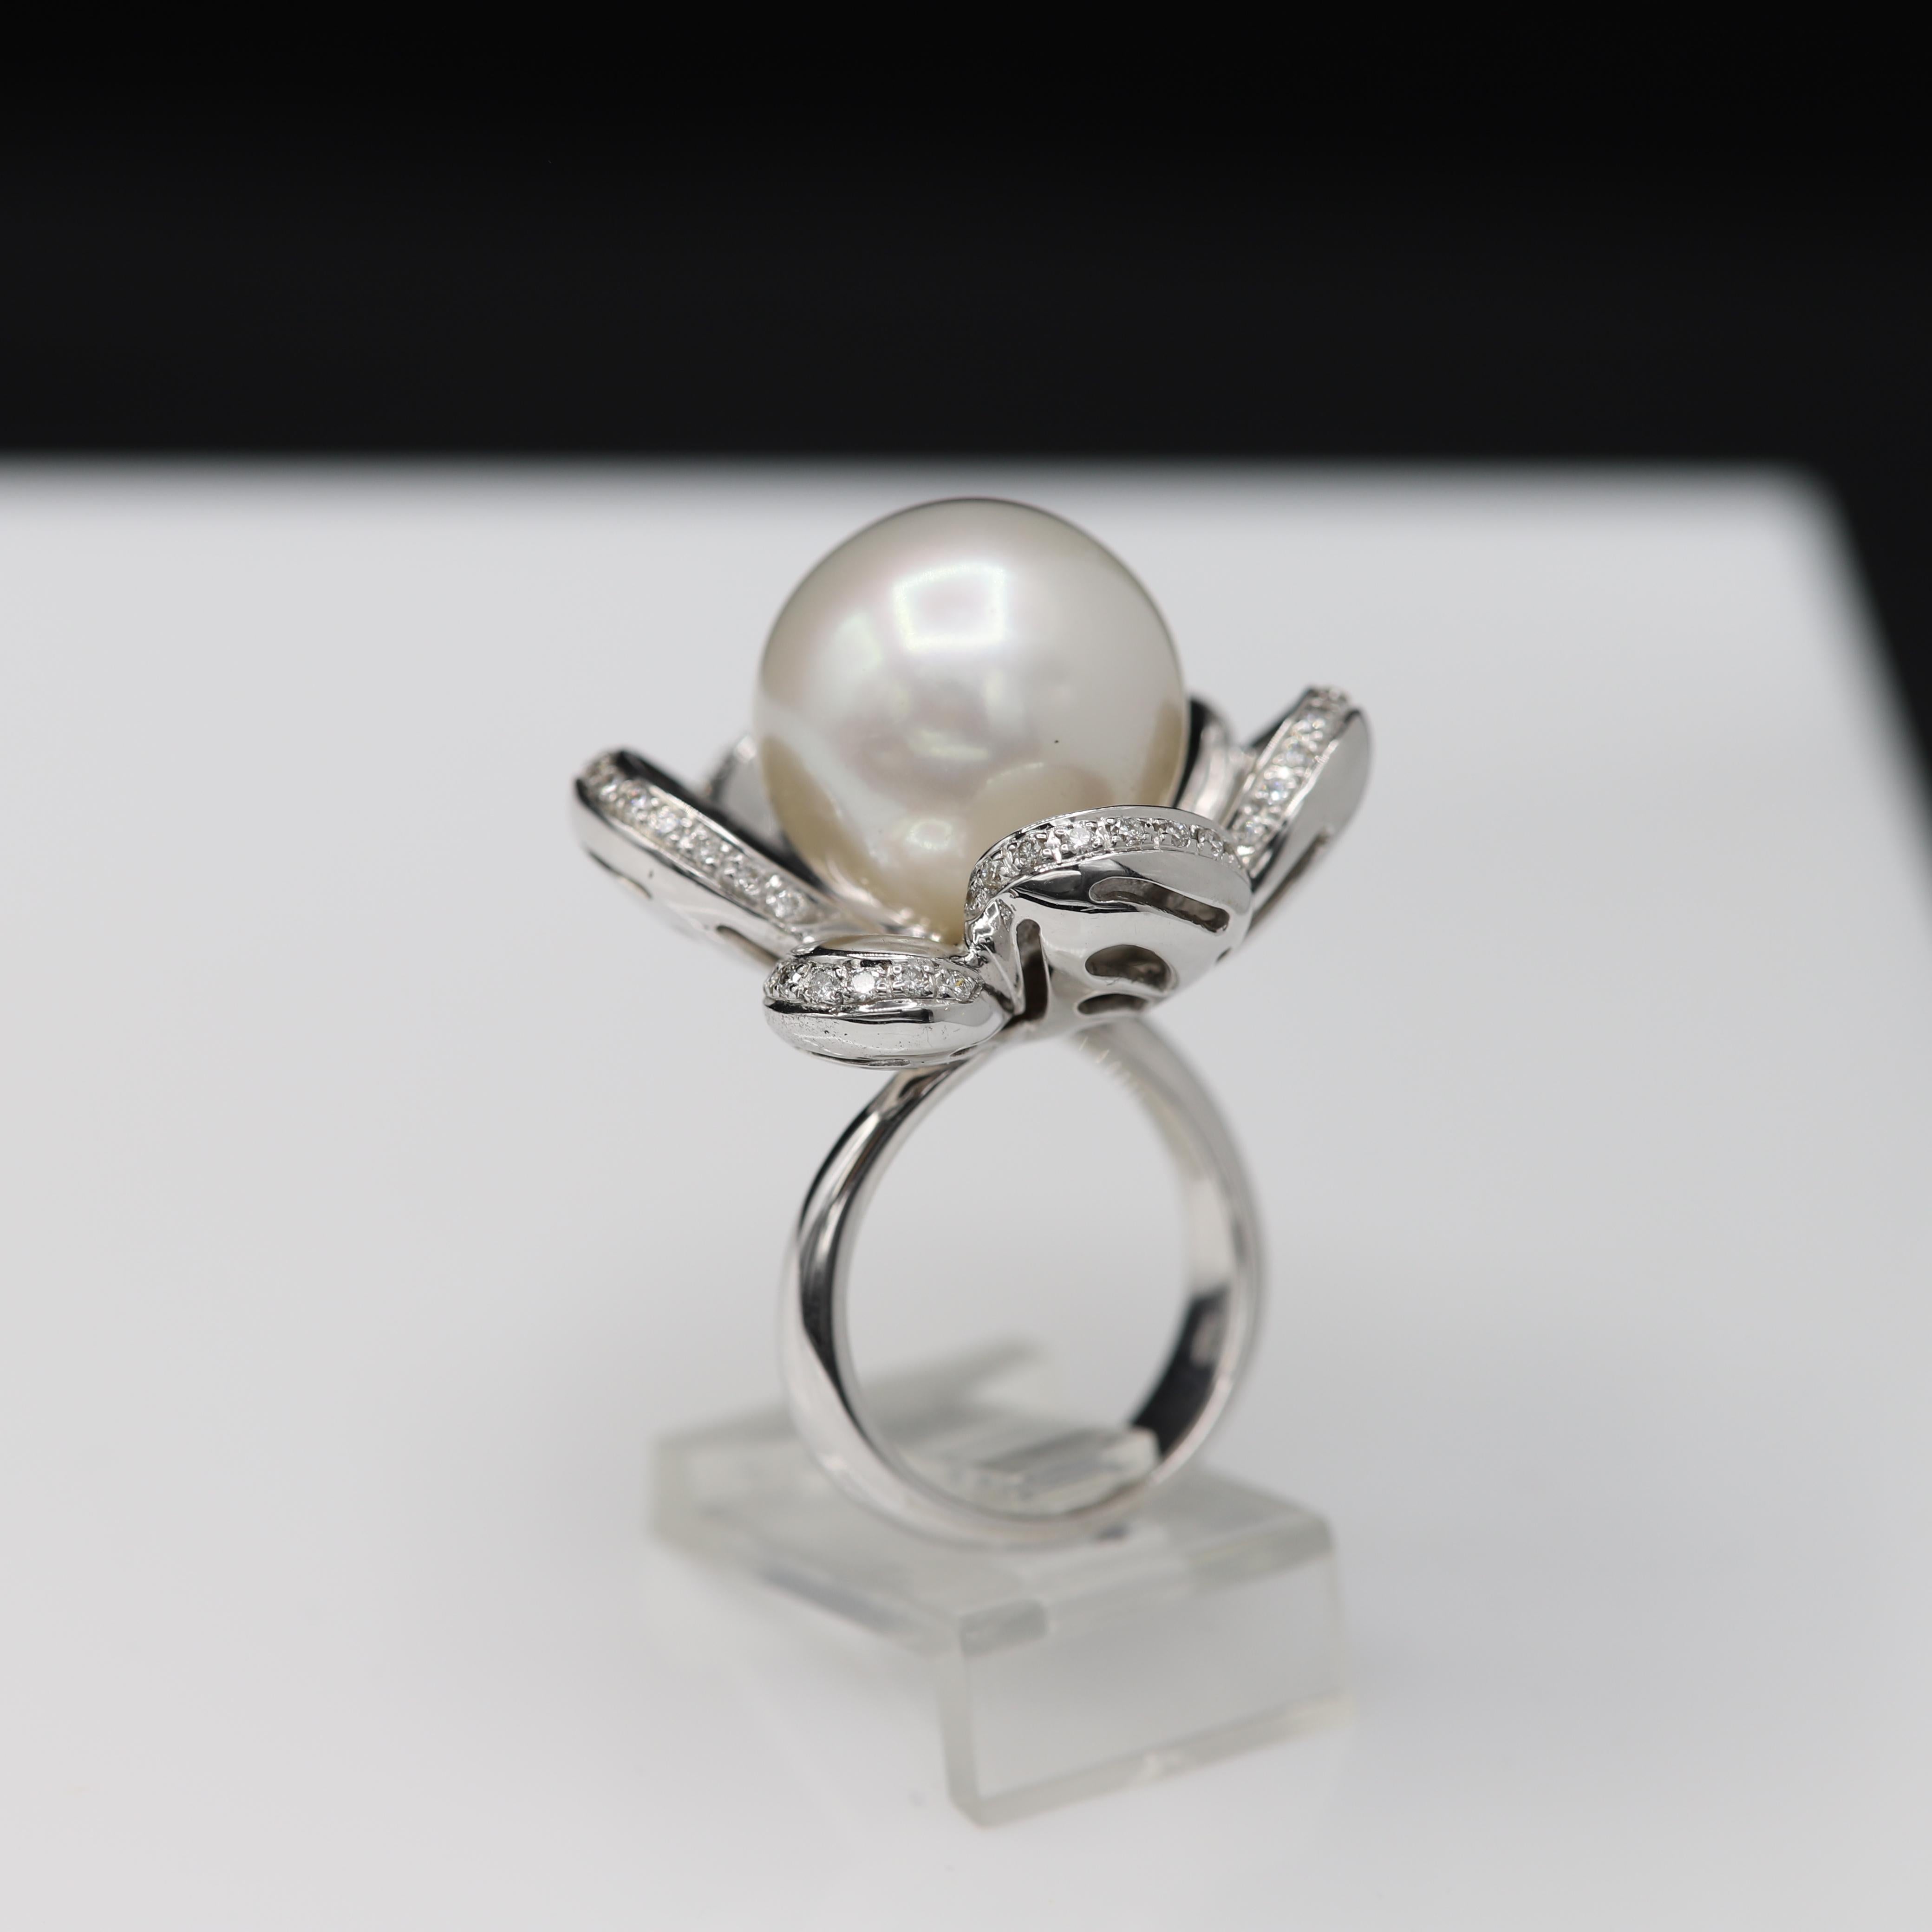 South Sea Pearl Flower Gold Ring 18 Karat White Gold & Diamonds Pearl For Sale 6